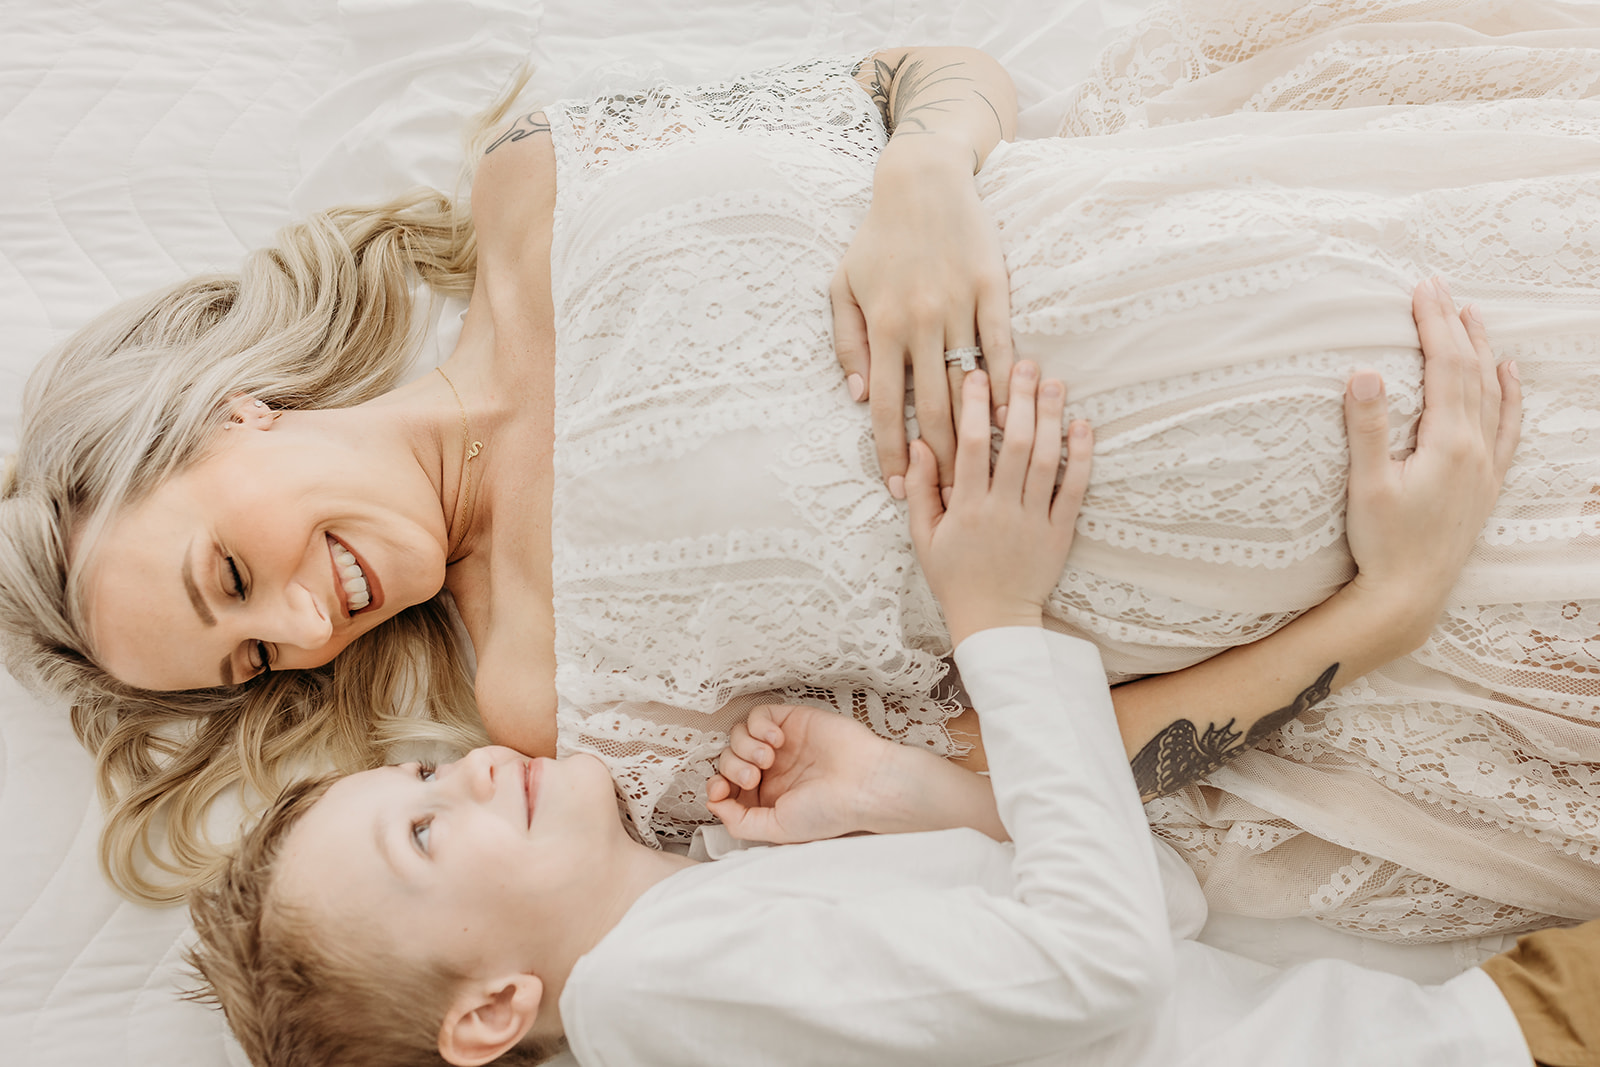 A pregnant mother in a white lace maternity dress lays on a bed cuddling with her older son eau claire chiropractors